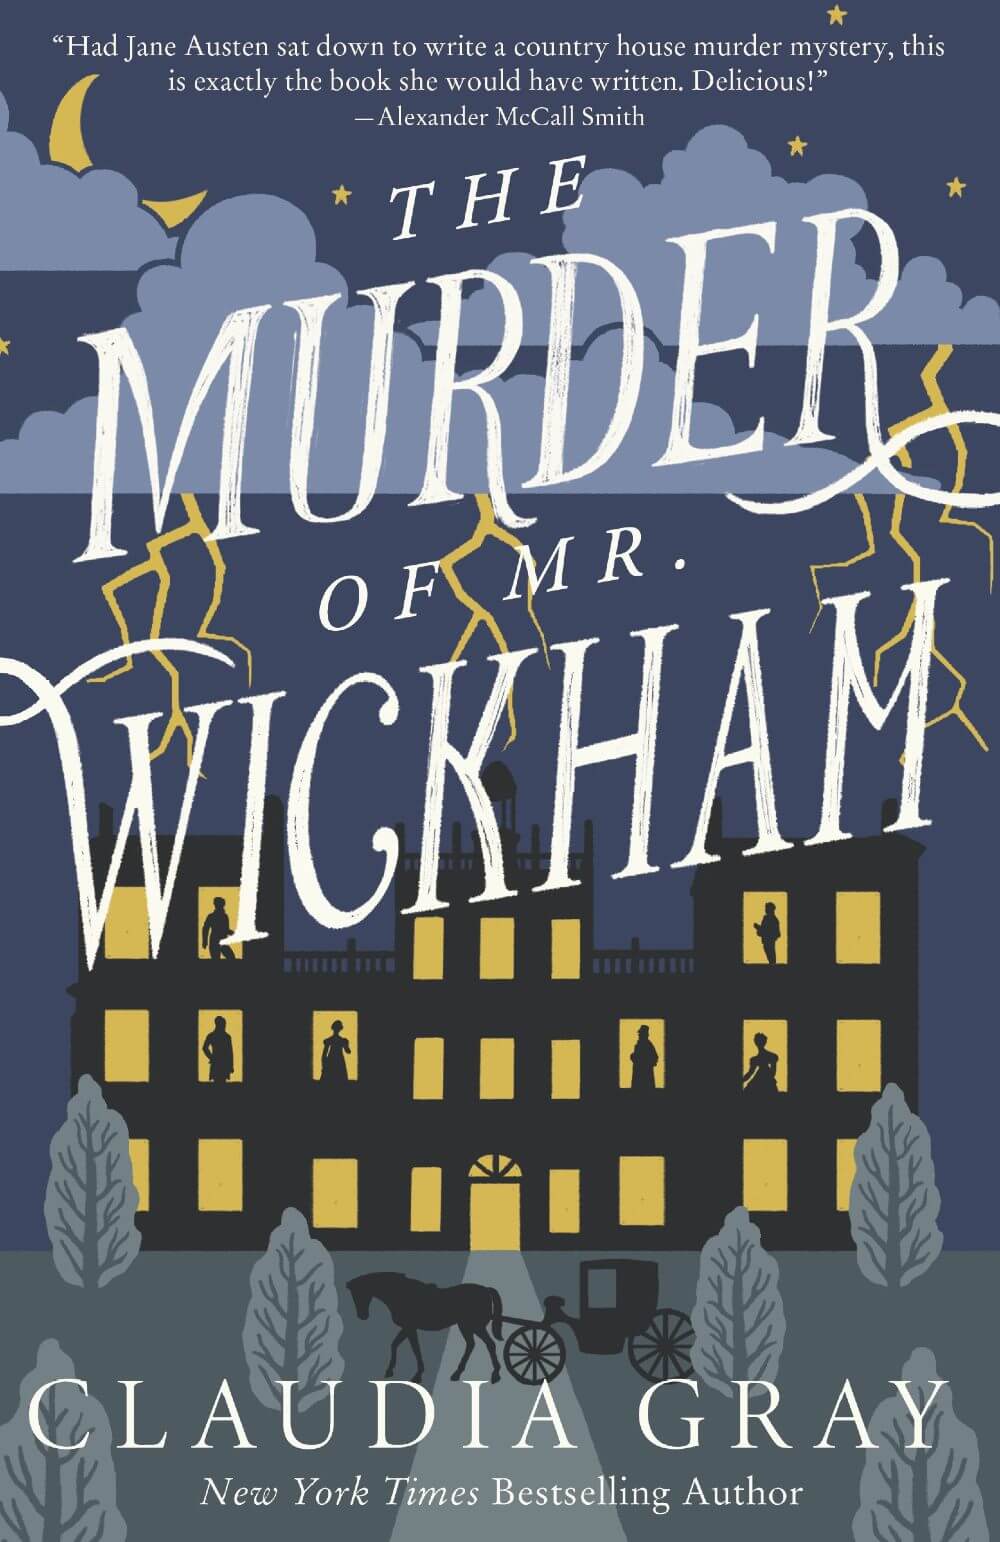 The Murder of Mr. Wickham by Claudia Gray 2022 book cover